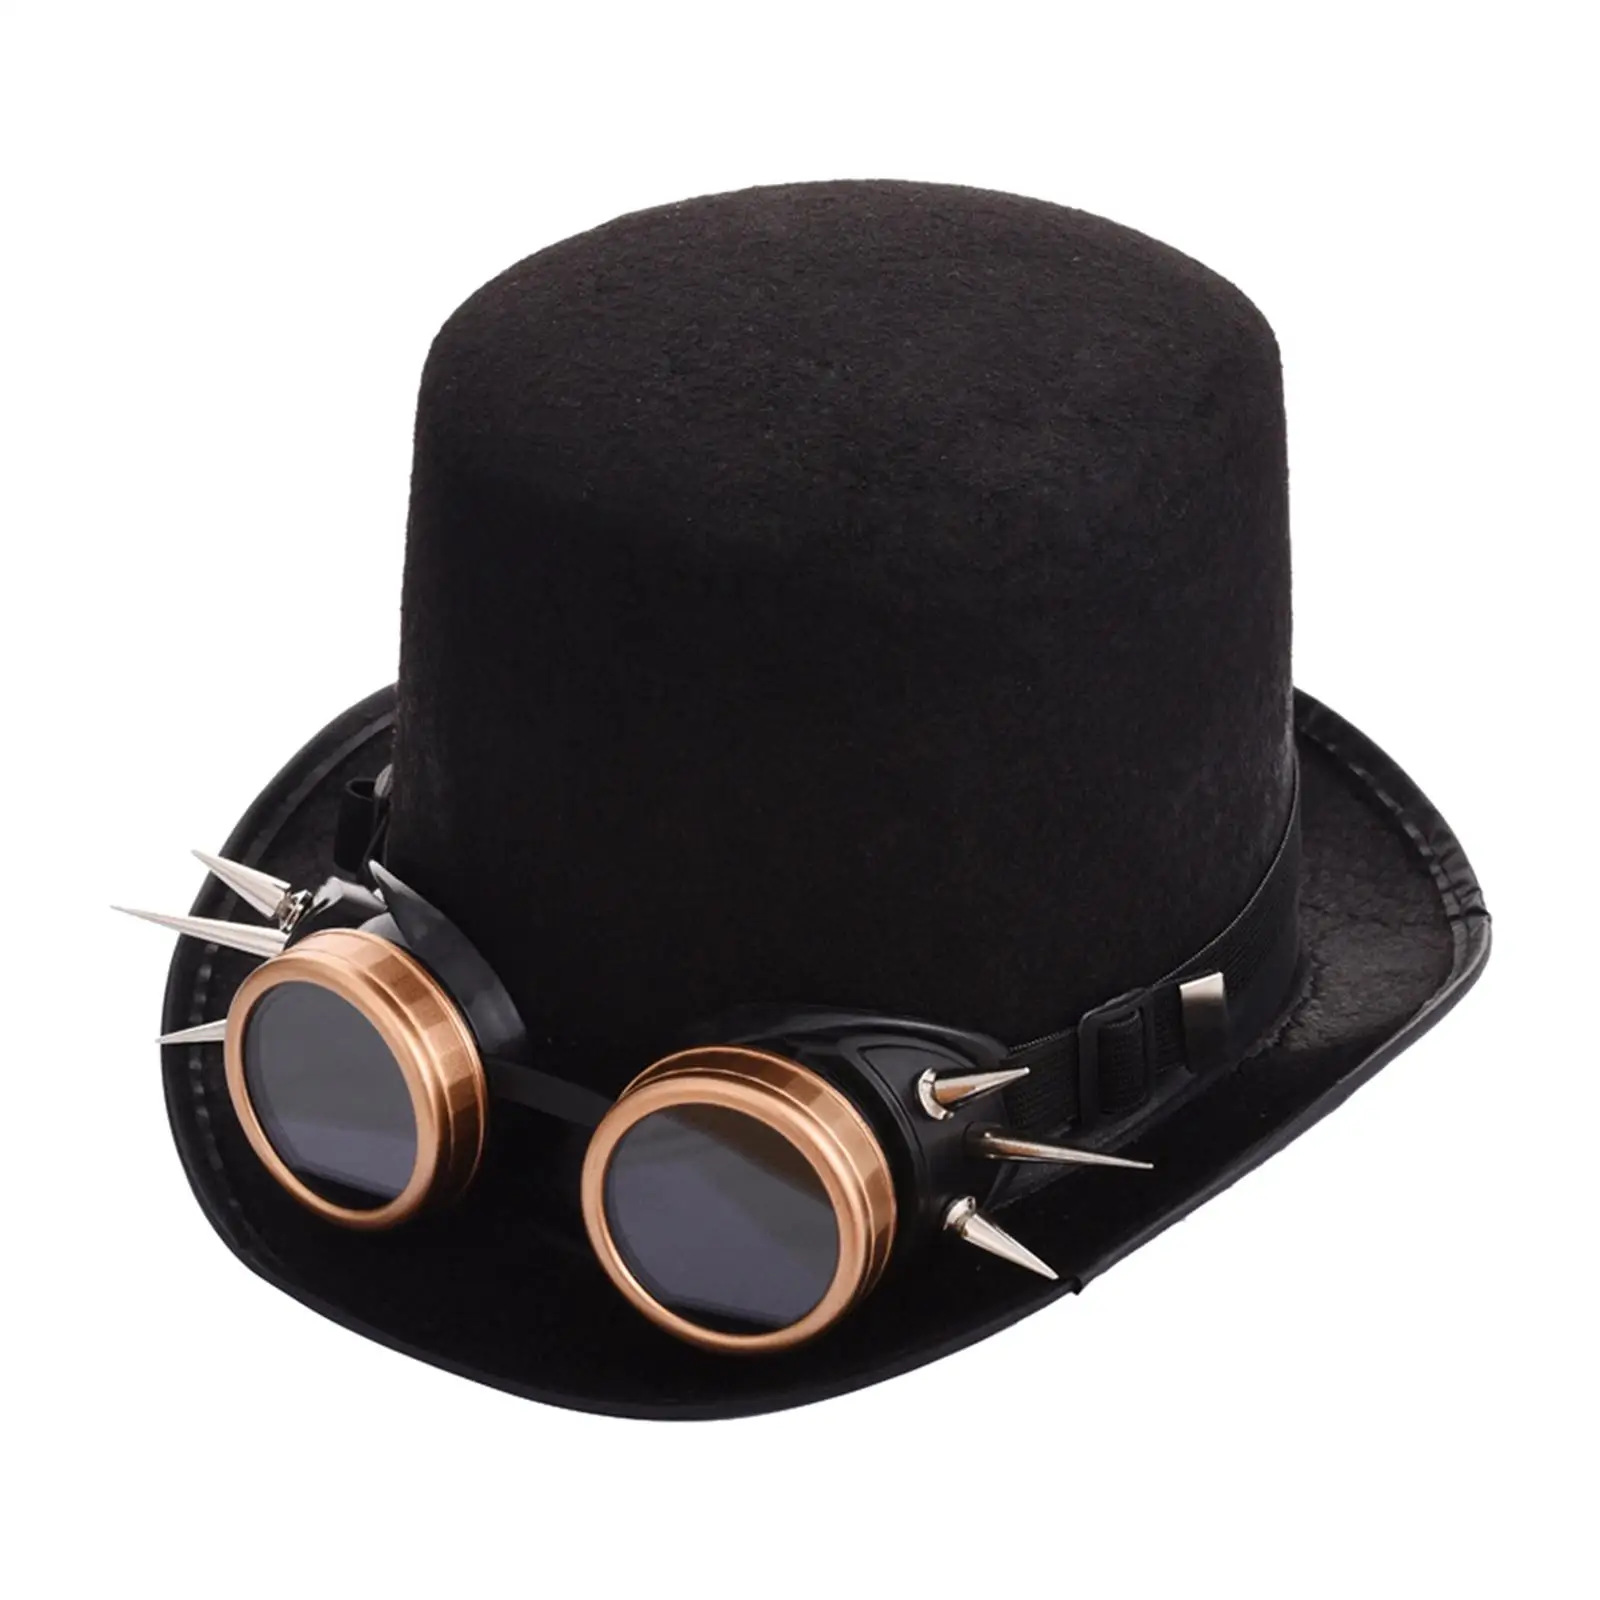 Vintage Style Steampunk Top Hat with Goggles Costume Accessory Cosplay Hat Halloween Party Hat Head Gear Punk Top Hats for Women